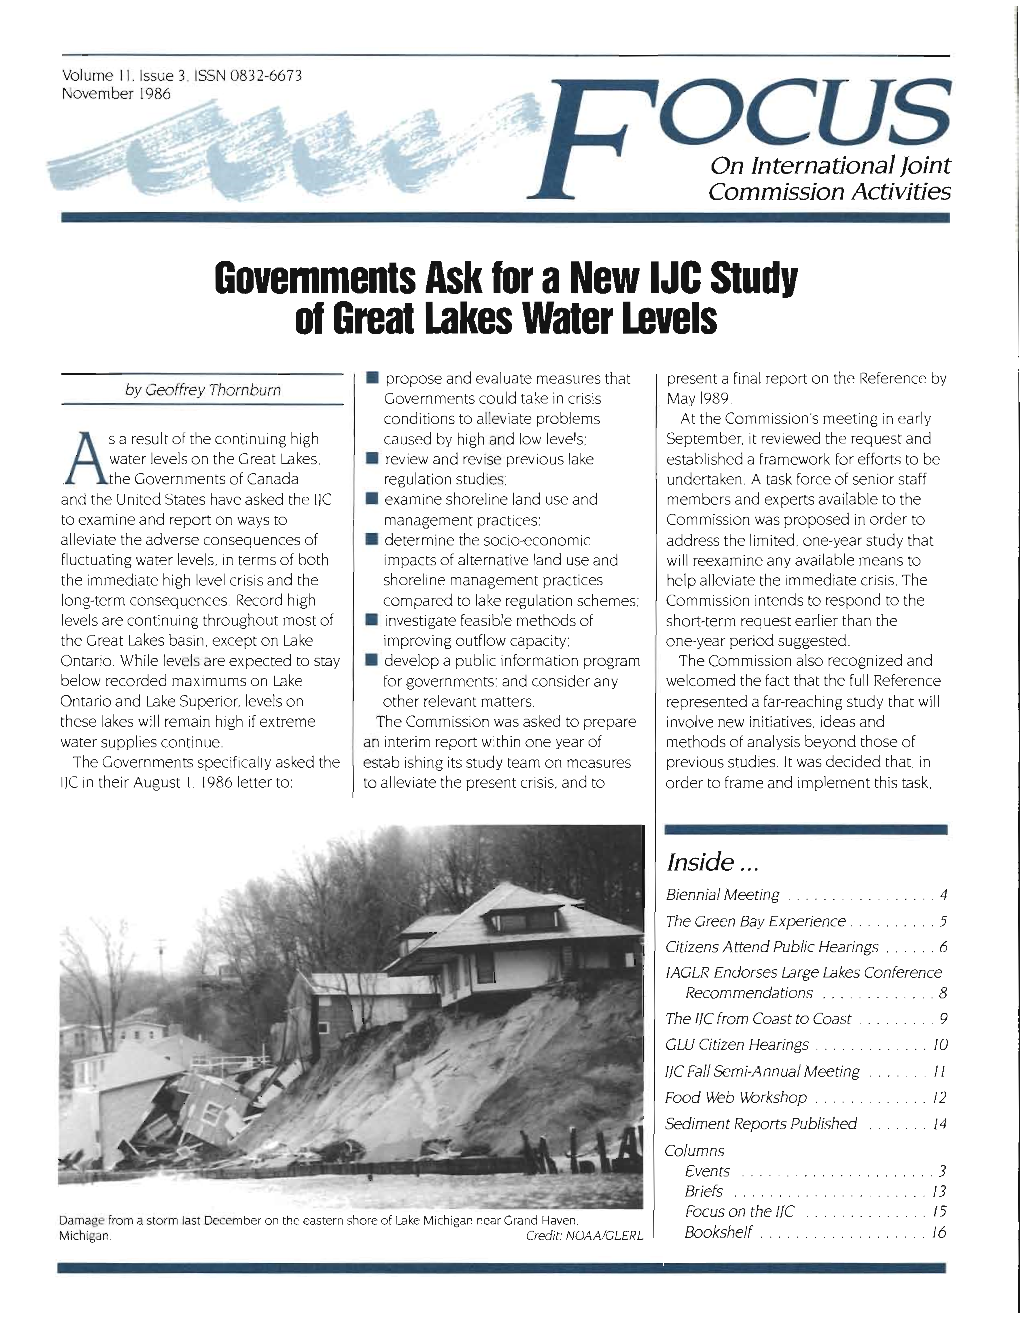 Governments Ask for a New IJC Study of Great Lakes Water Levels